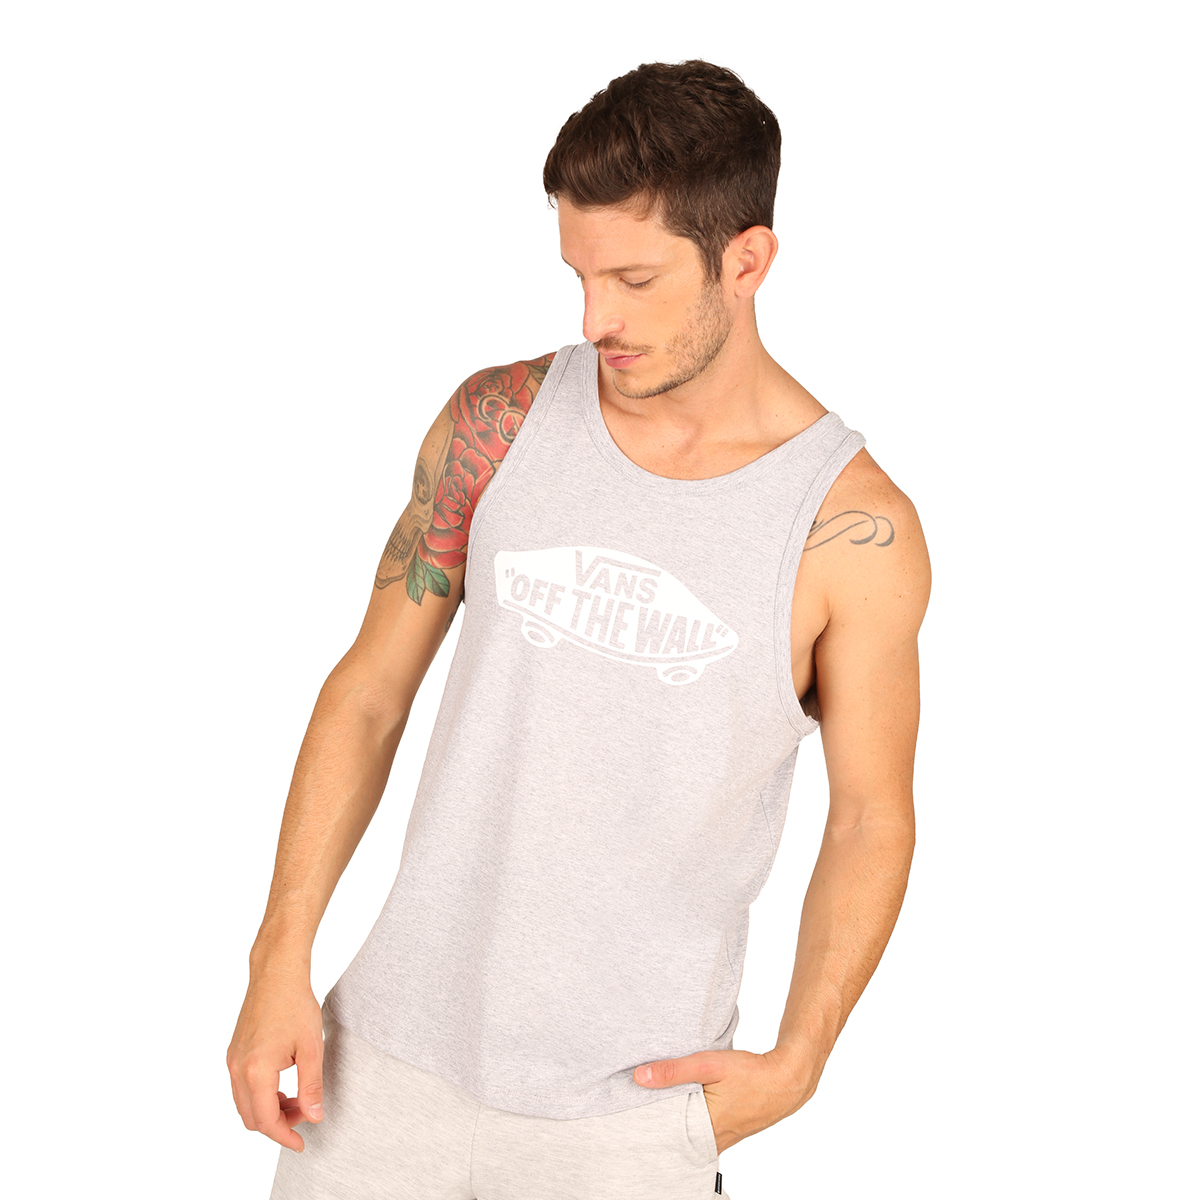 Musculosa Vans Off The Wall,  image number null